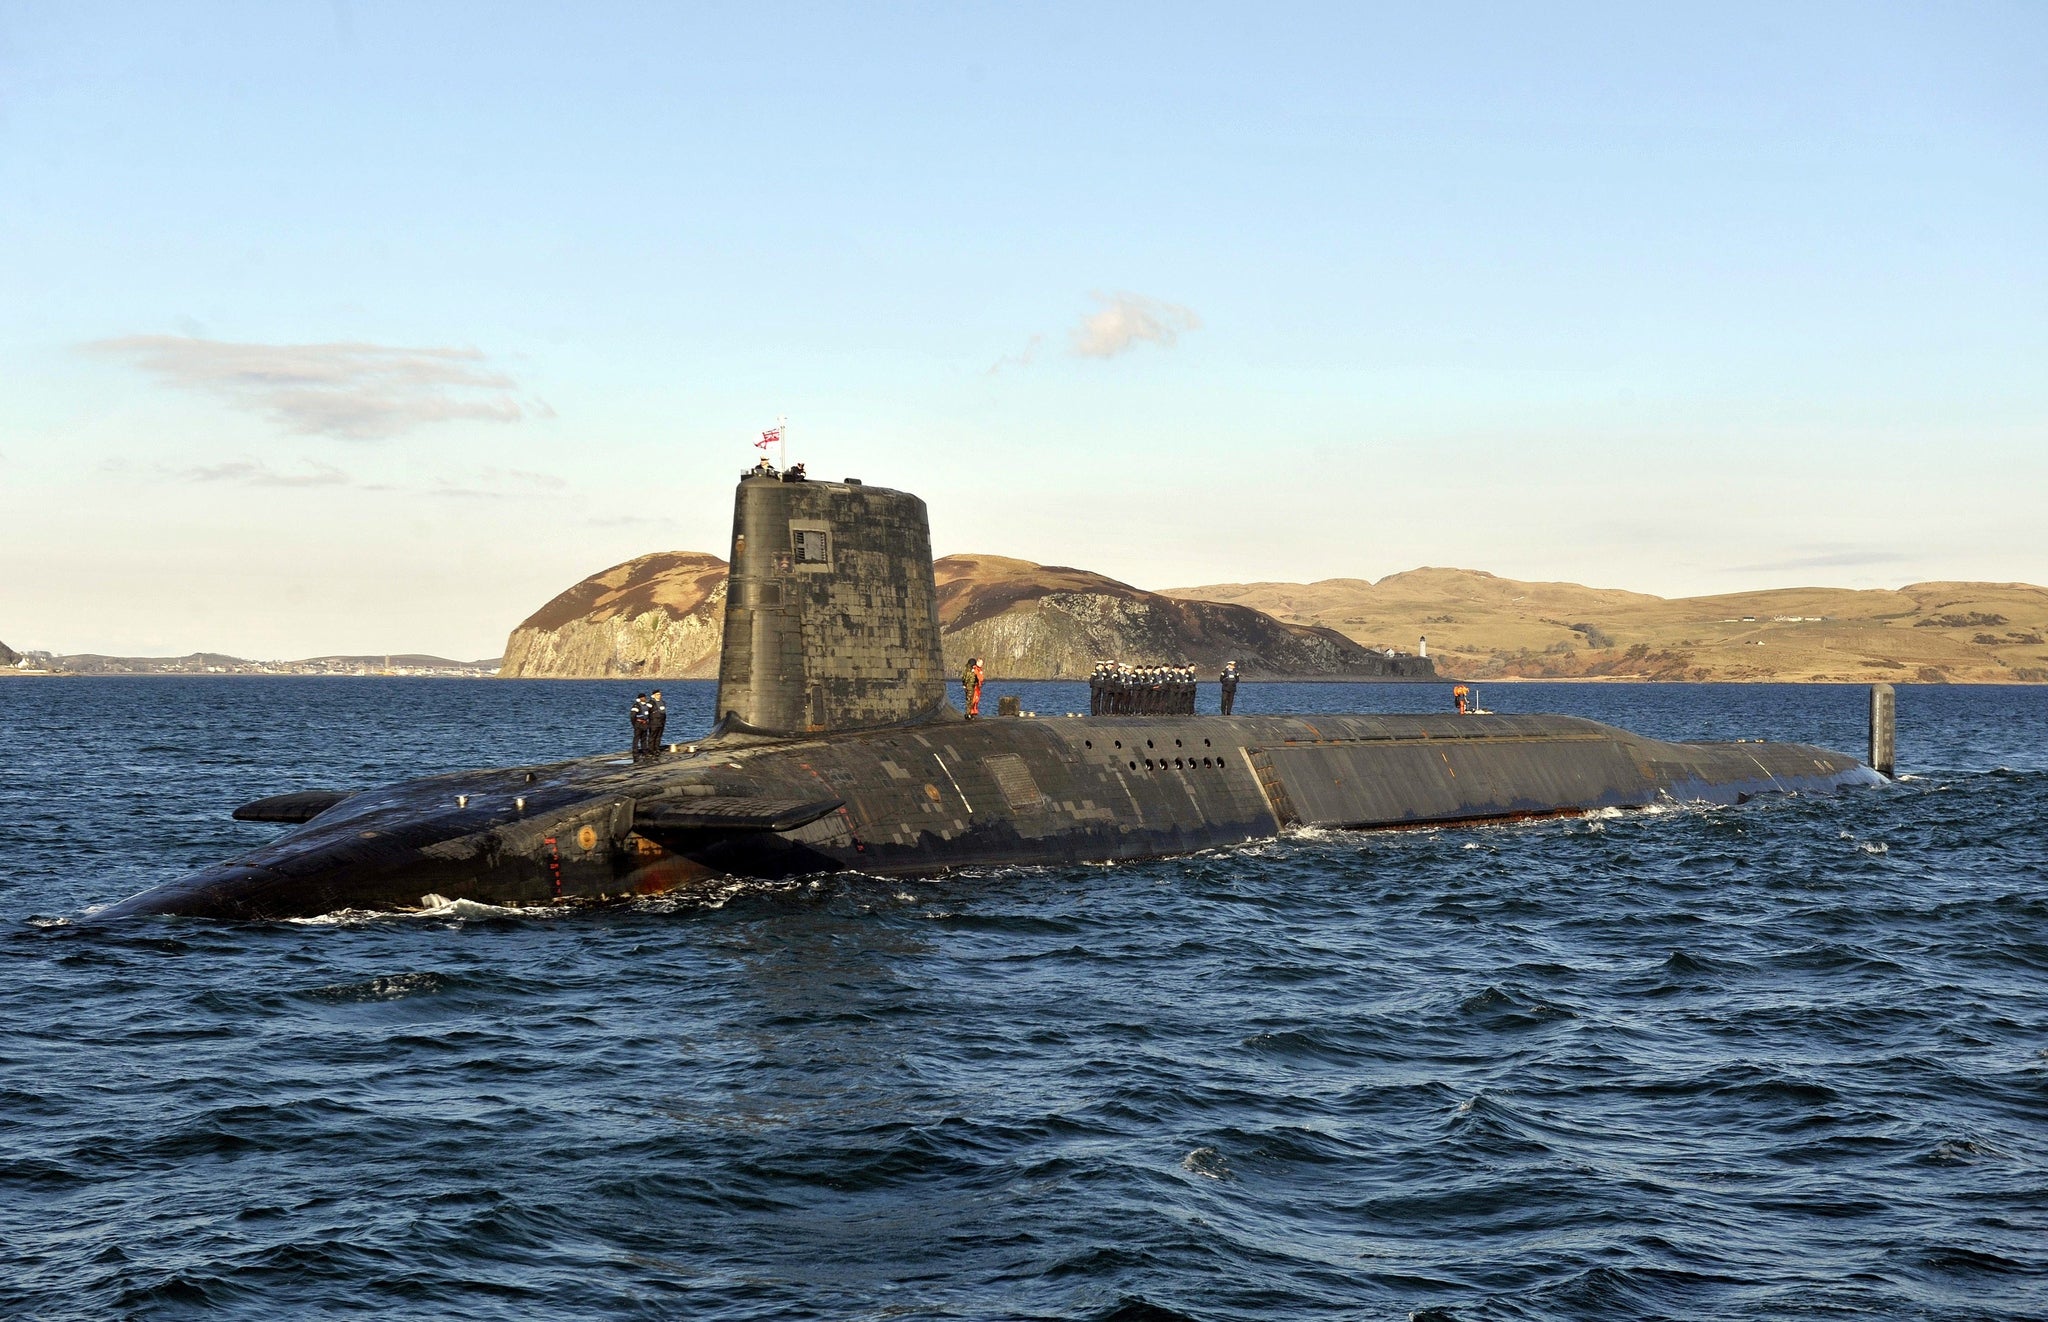 HMS Victorious, a Trident nuclear submarine, patrols the waters of the west coast of Scotland